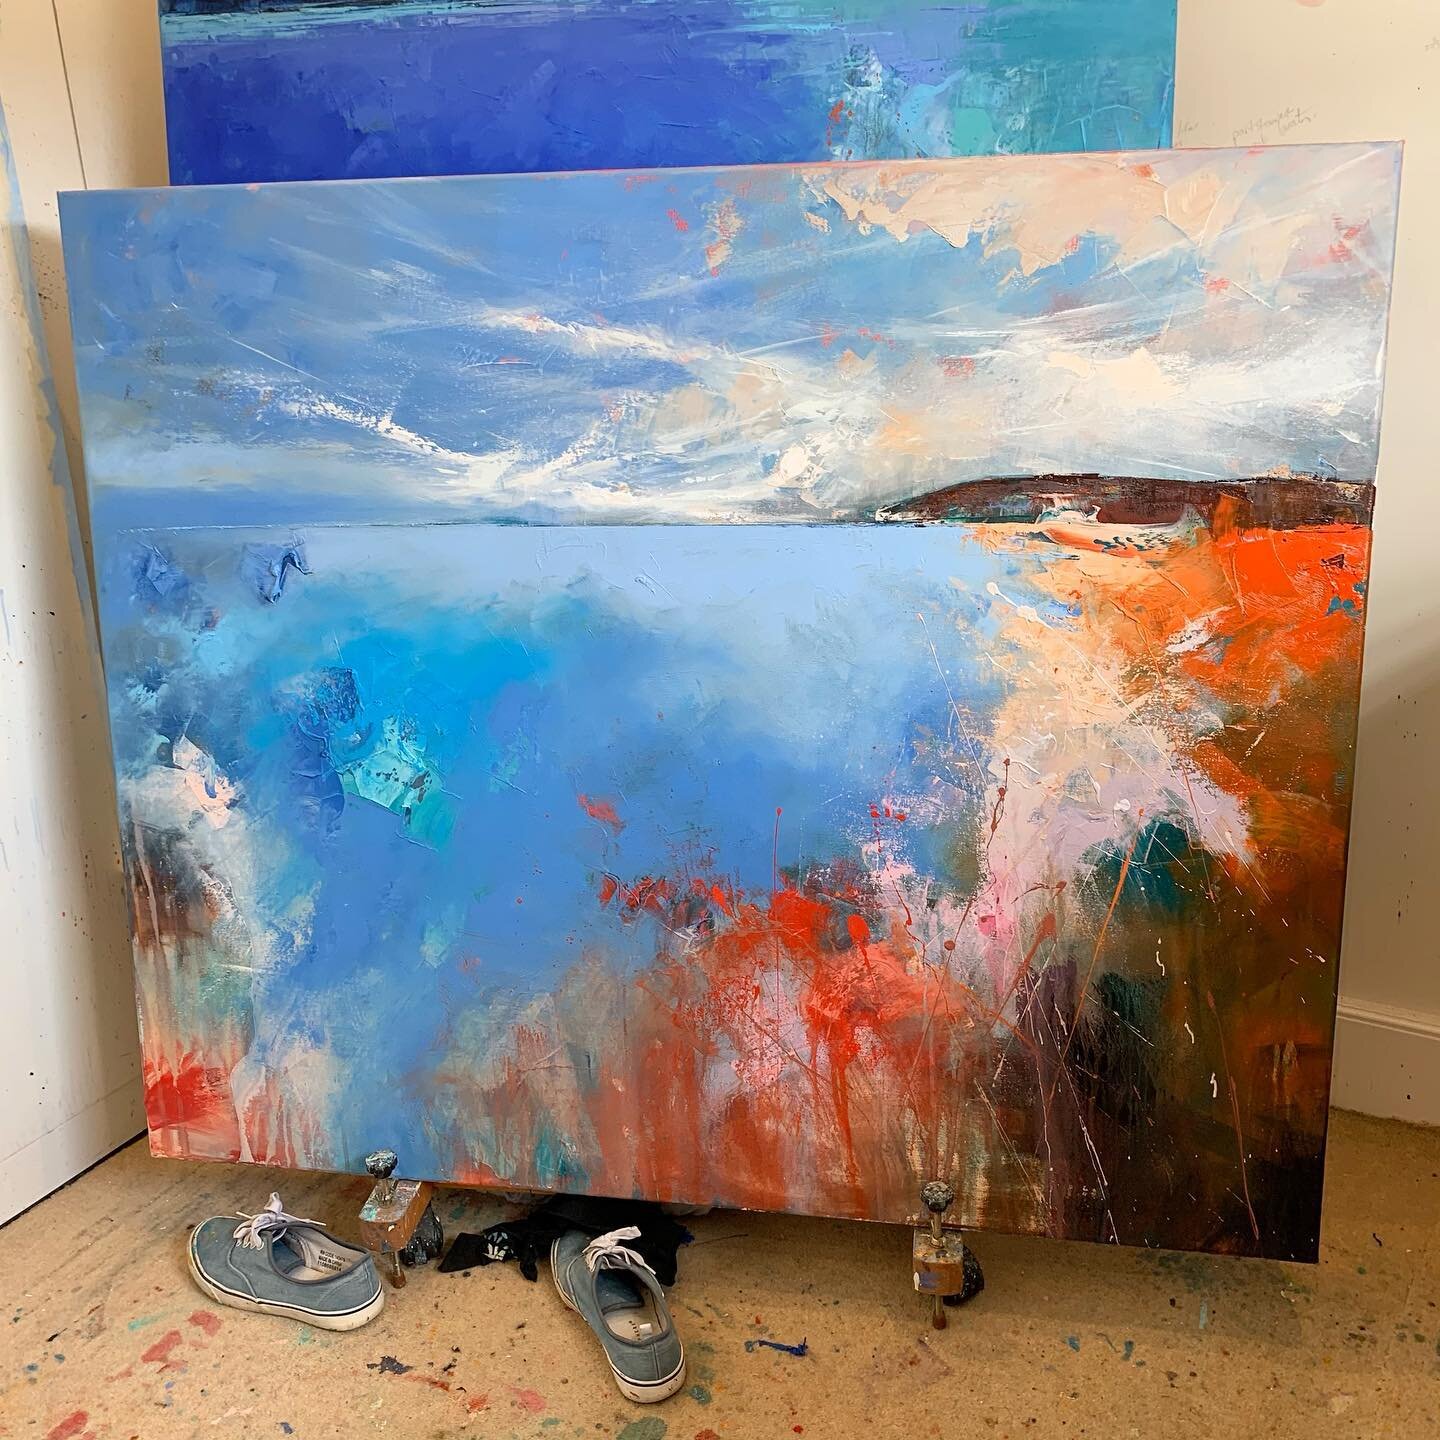 N E W. &ldquo;Draw Me In&rdquo;. Oil on canvas. Soon for sale! 💙❤️🧡🤍

#naomcdowellart #cornwall #londonartist #oilpaint #oiloncanvas #oilpainting #colour #abstractpainting  #padstow #contemporaryart #landscapeart #landscapepainting #rock #instaart